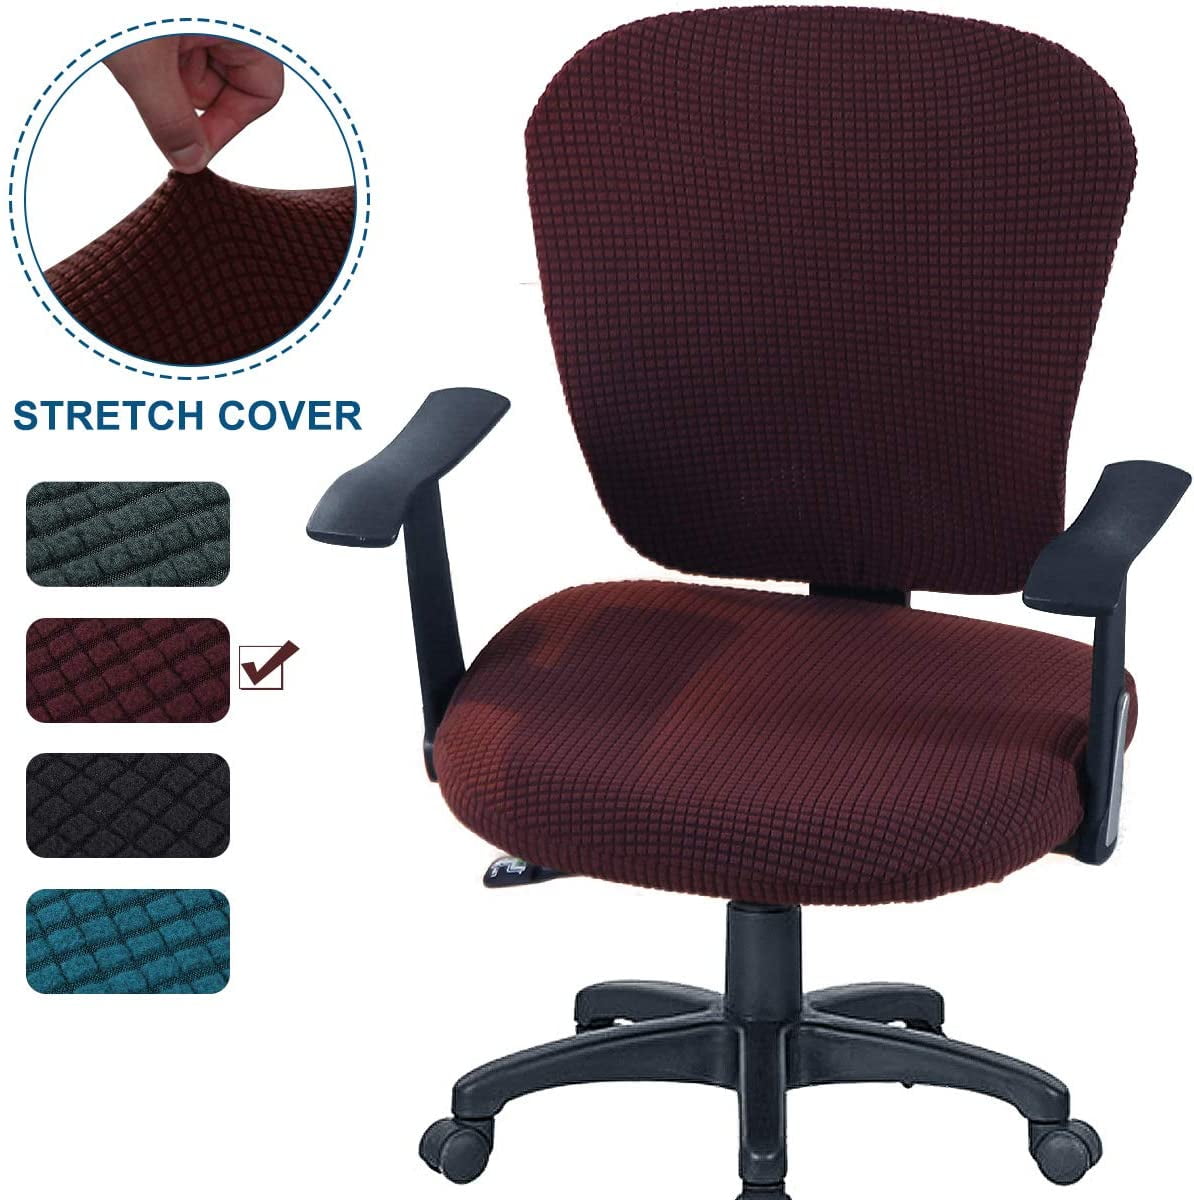 Office Computer Chair Covers Stretch Computer Arm Anti-dust Seat Case Cushion UK 